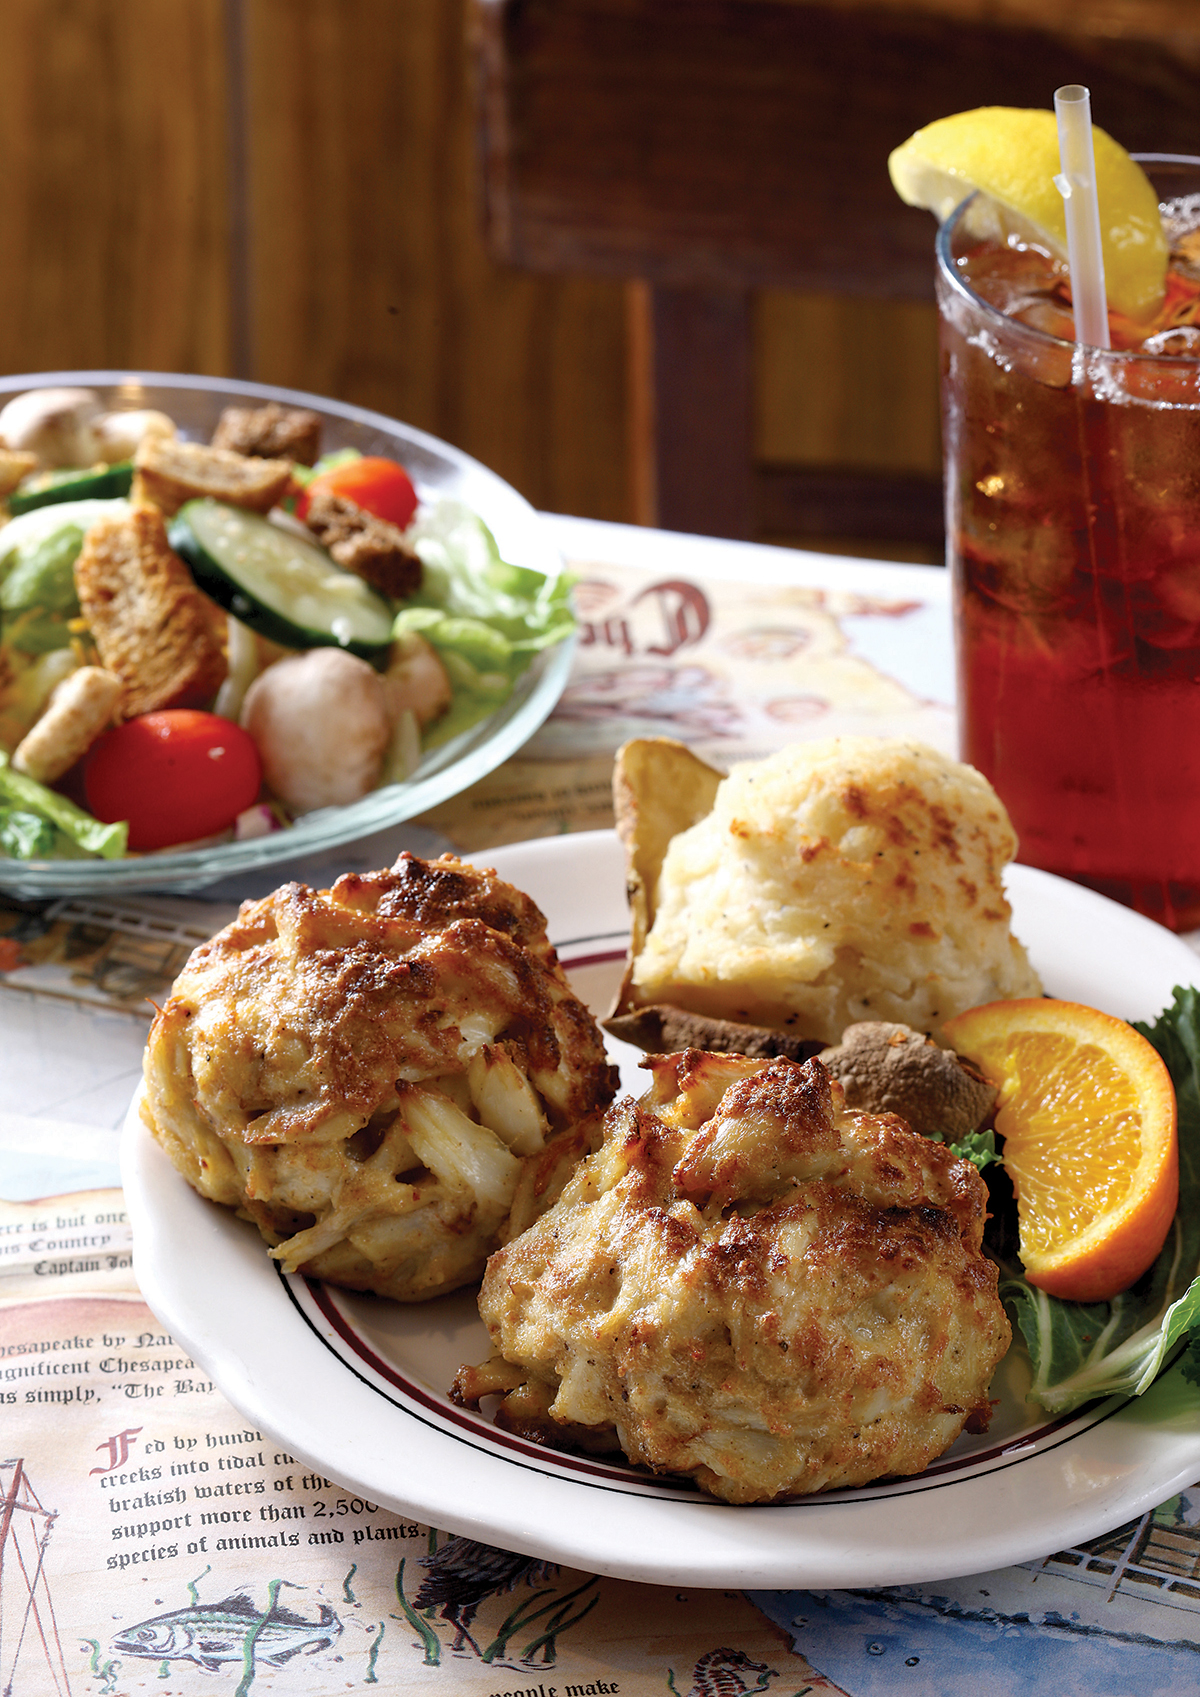 Ship Maryland Crabcakes to Montana | Order Online, Fast Shipping!